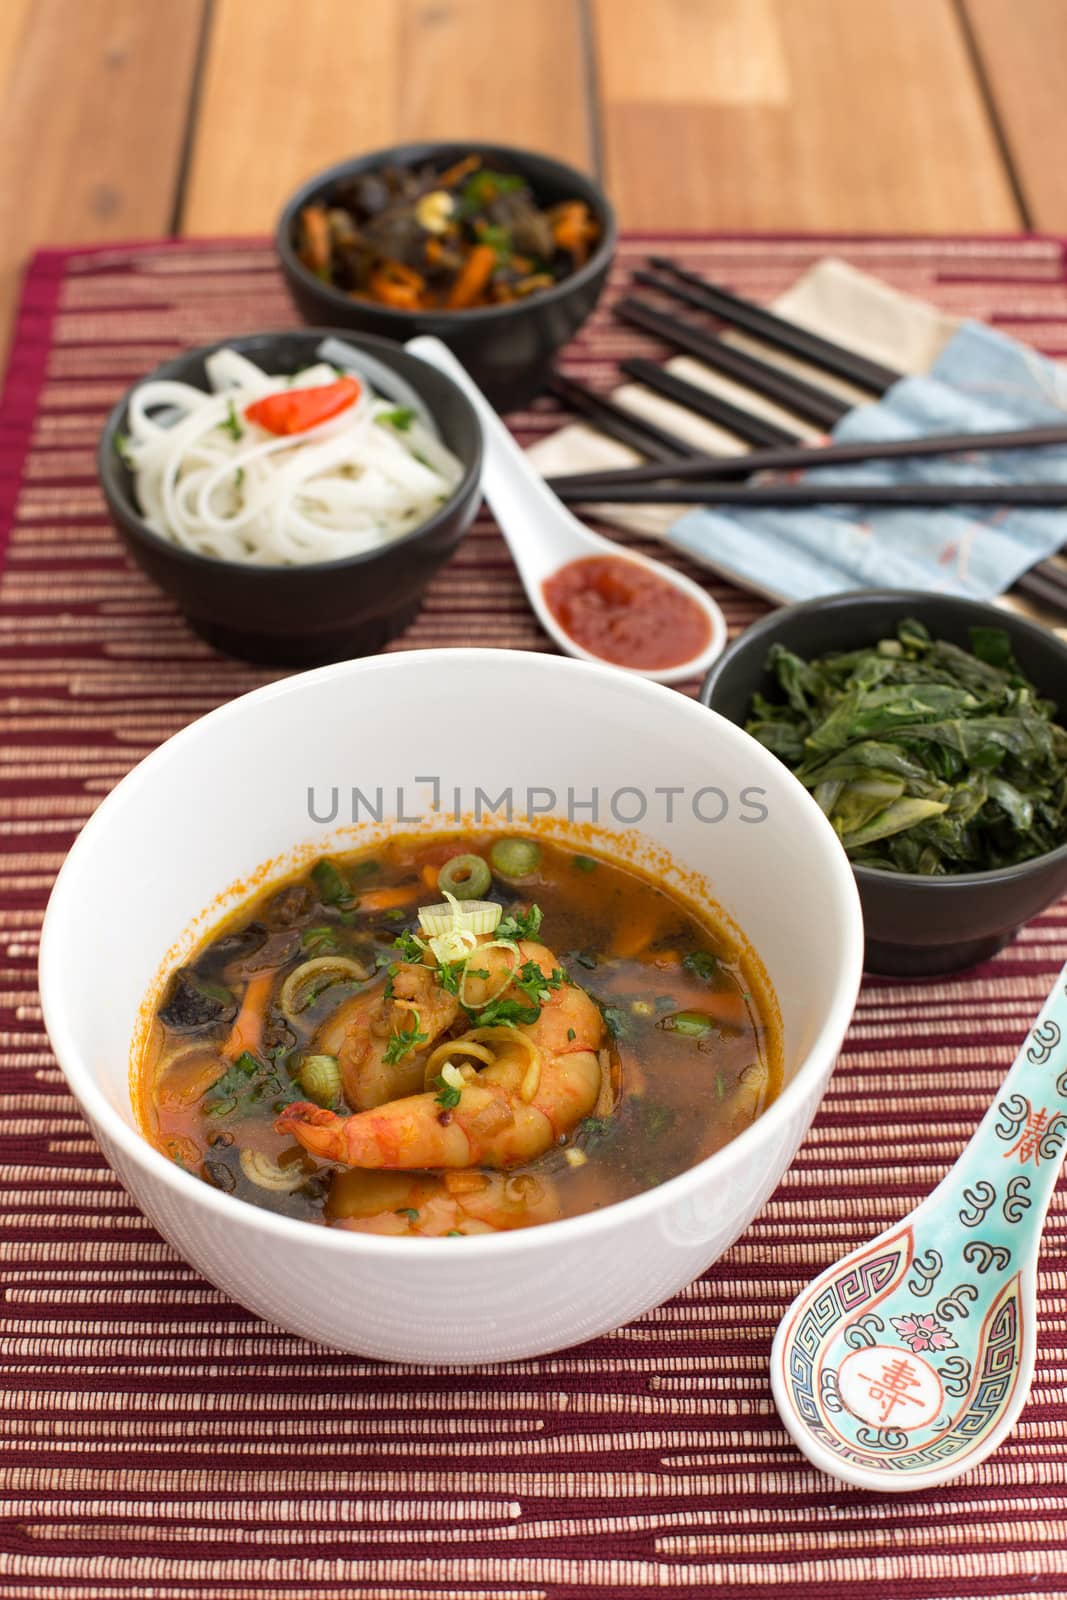 Asian soup with shrimps in white ceramic bowl composed with ceramic spoon with spicy red sauce, asian chopsticks and black bowls with rice noodles, kale (green cabbage) and fried vegetables. Composition on a old styled wooden table.